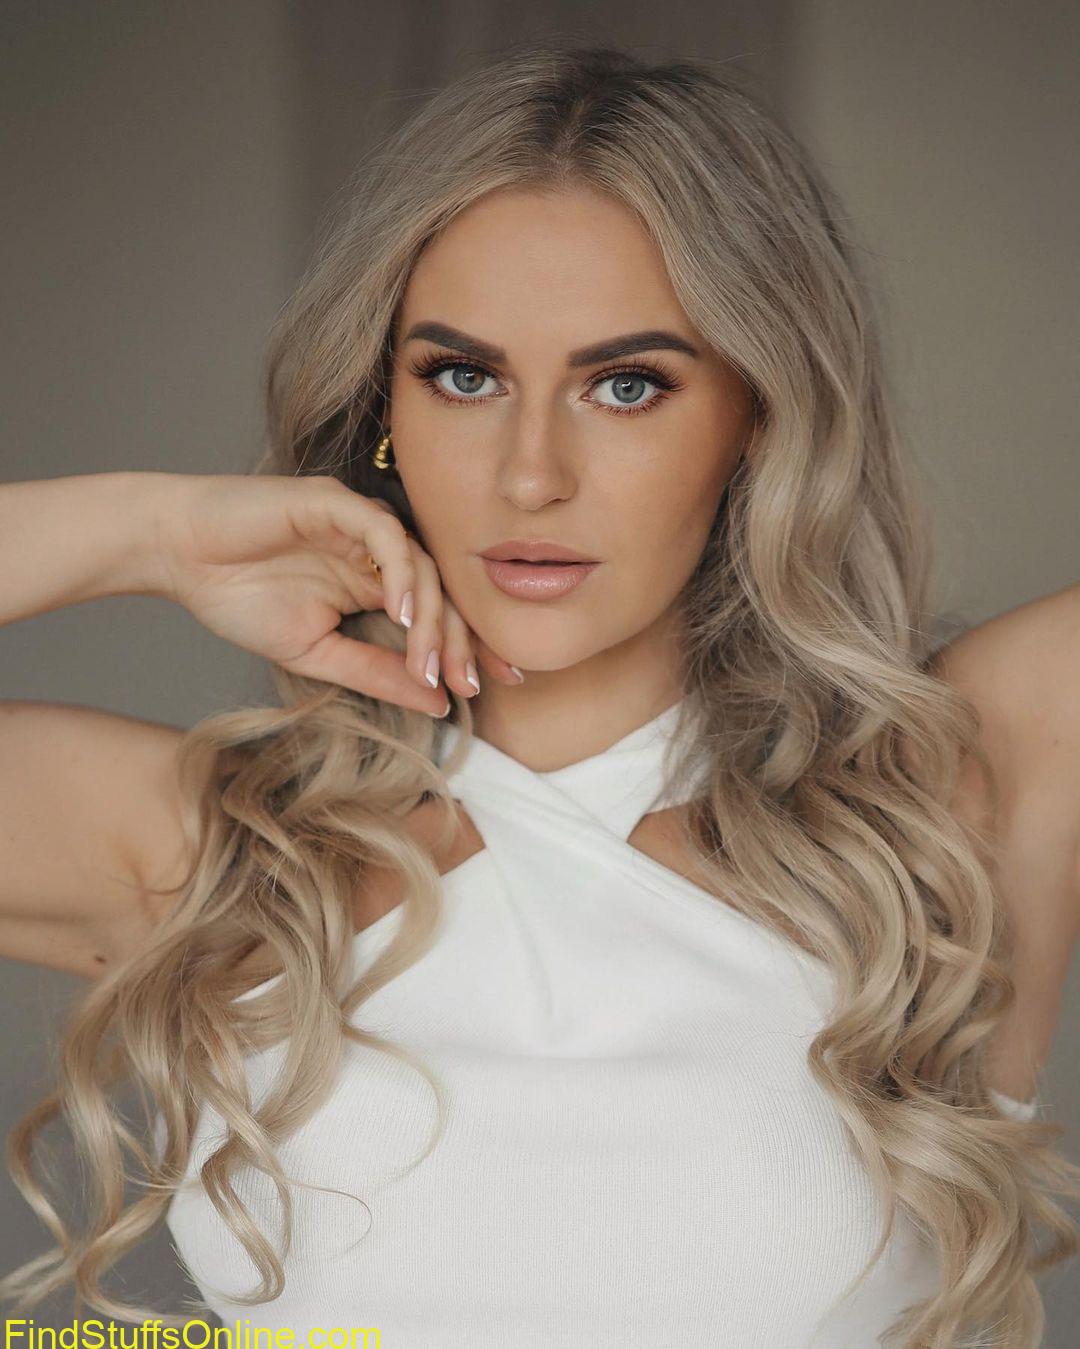 model anna Nystrom hot images 19